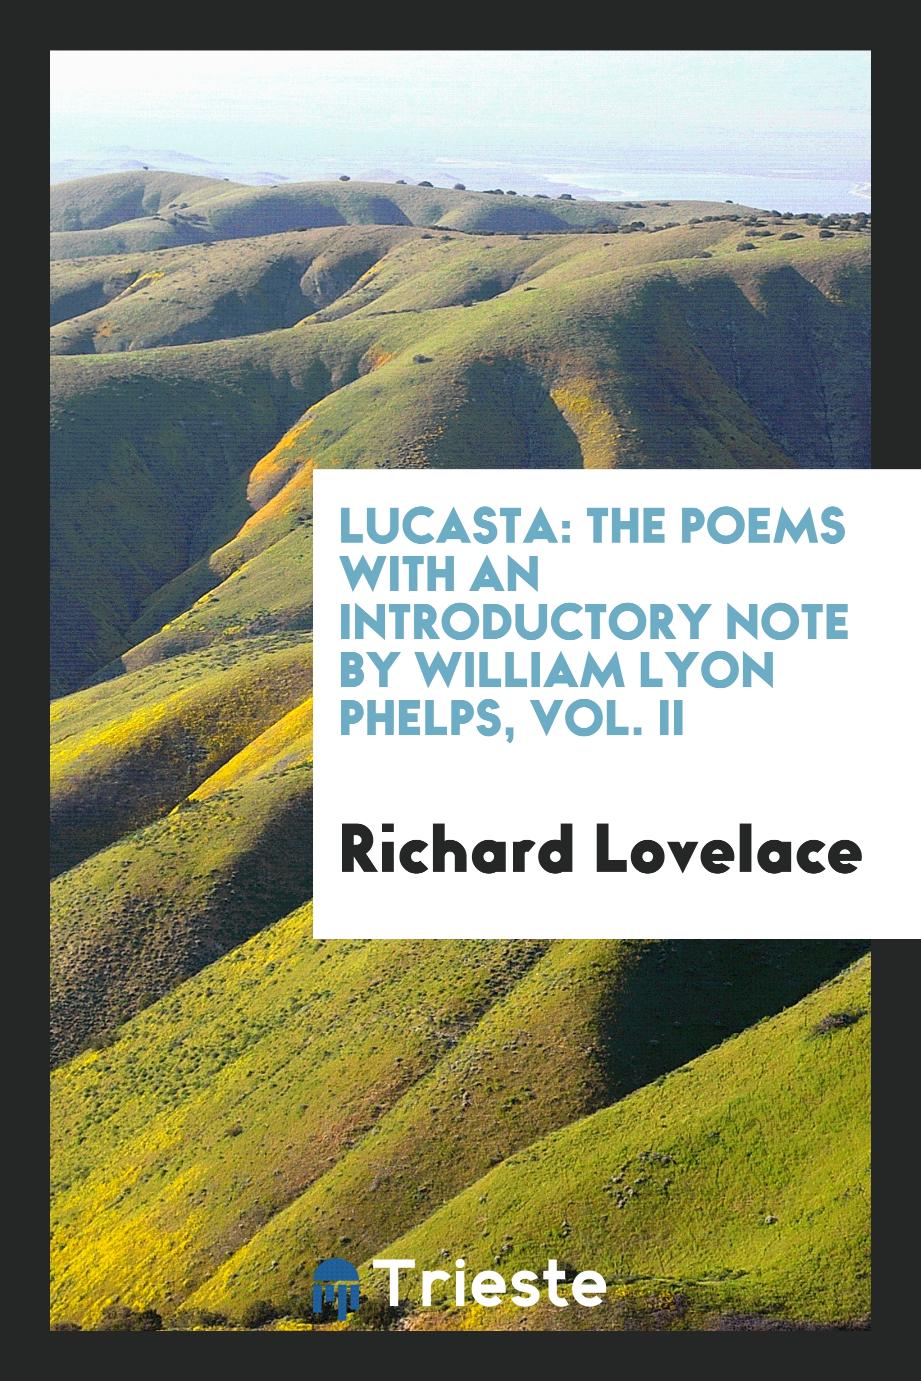 Lucasta: the poems with an introductory note by William Lyon Phelps, Vol. II